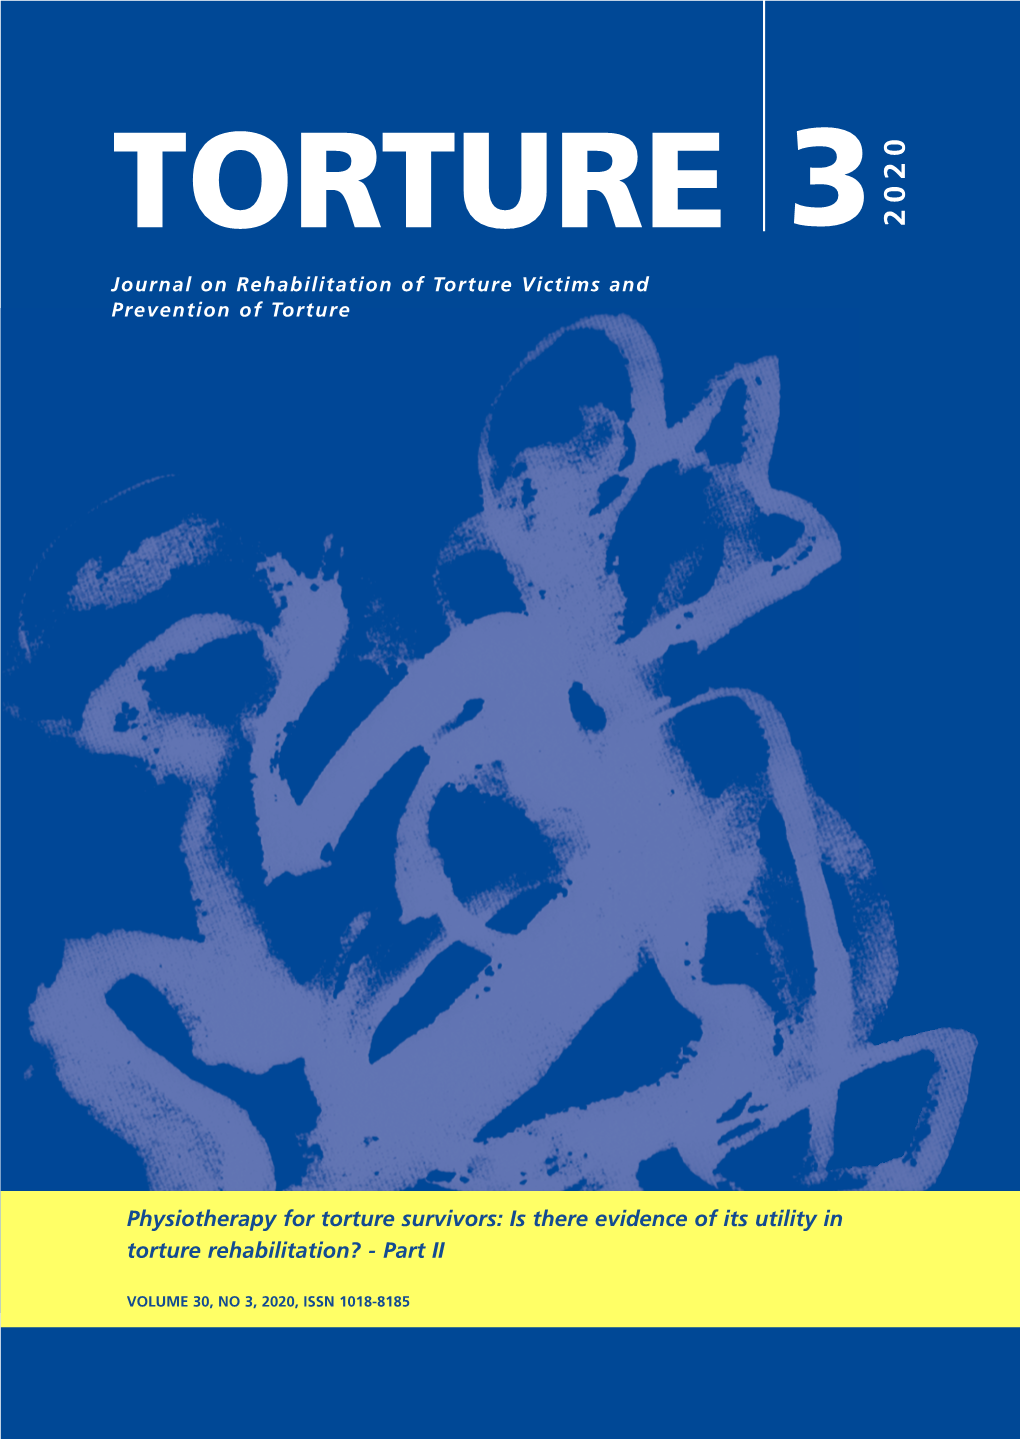 TORTURE 3 2020 Journal on Rehabilitation of Torture Victims and Prevention of Torture